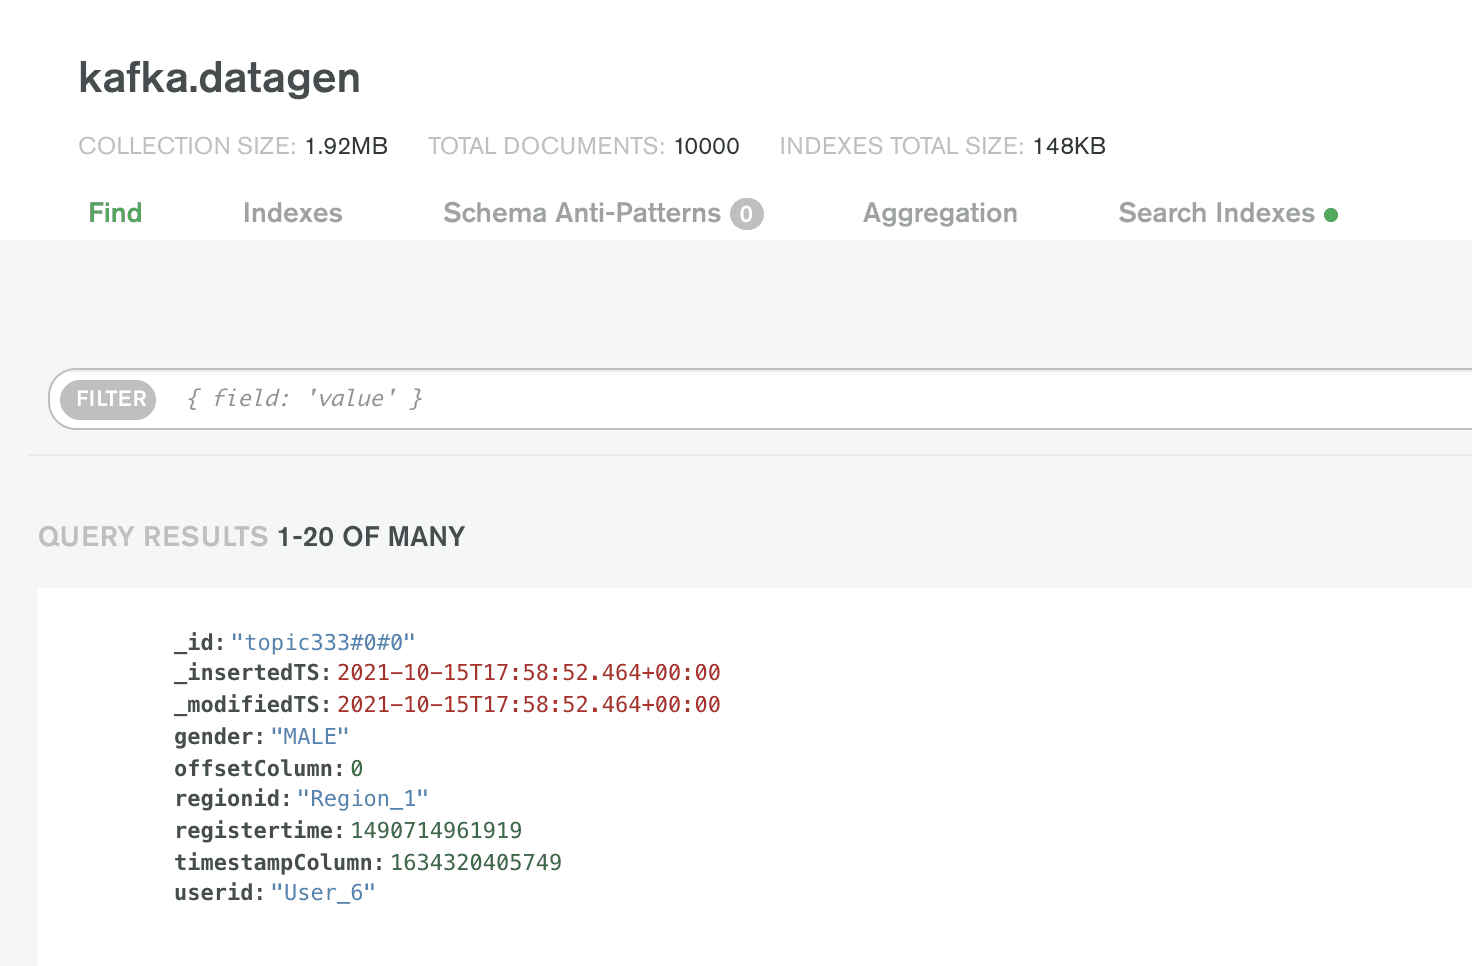 Figure 1: Datagen collection as seen in MongoDB Atlas Collections page